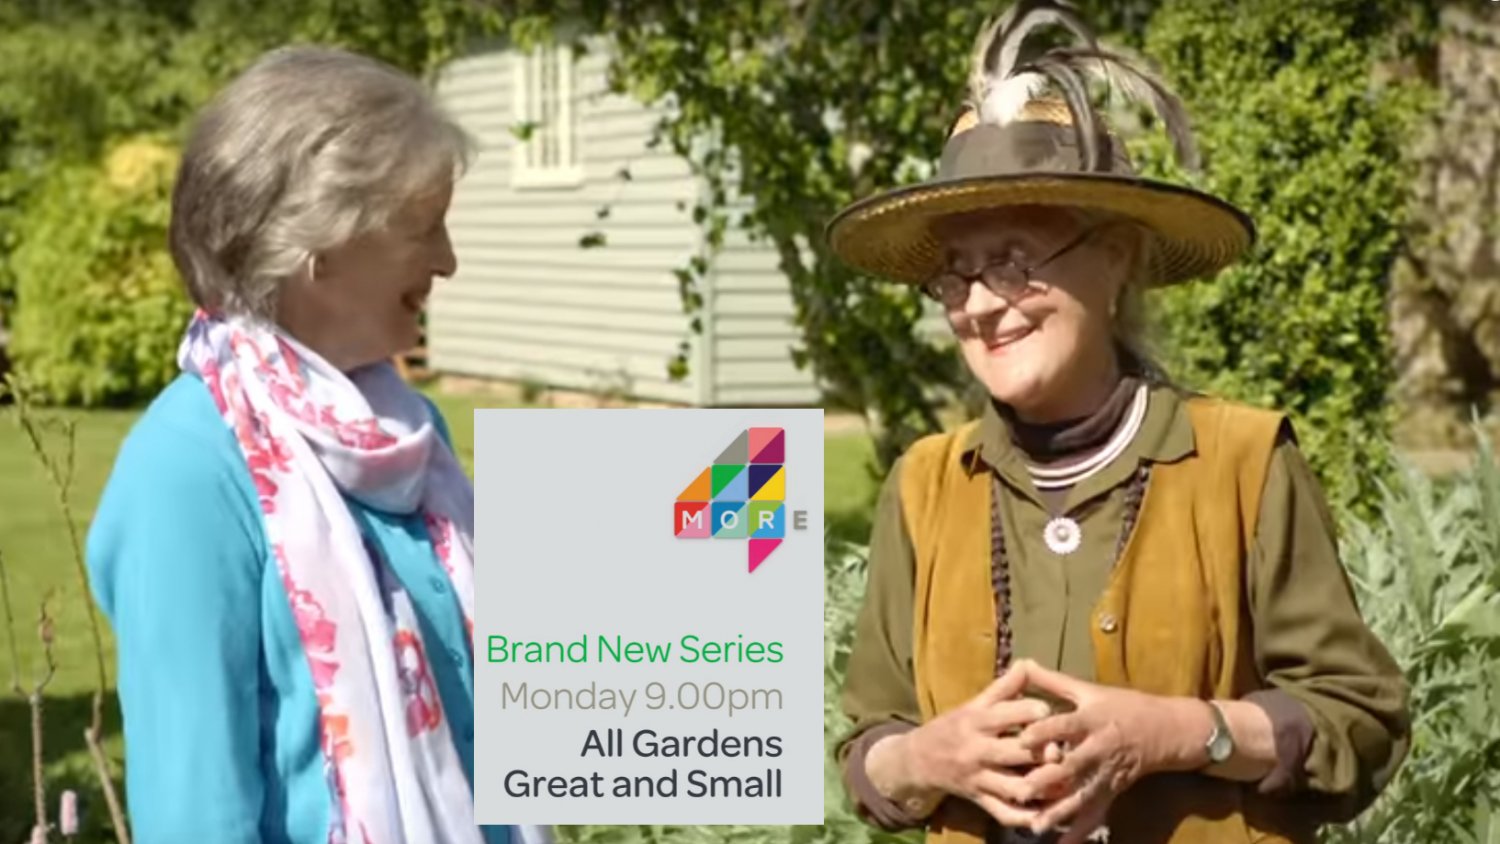 'All Gardens Great and Small' More4 at 9.00pm